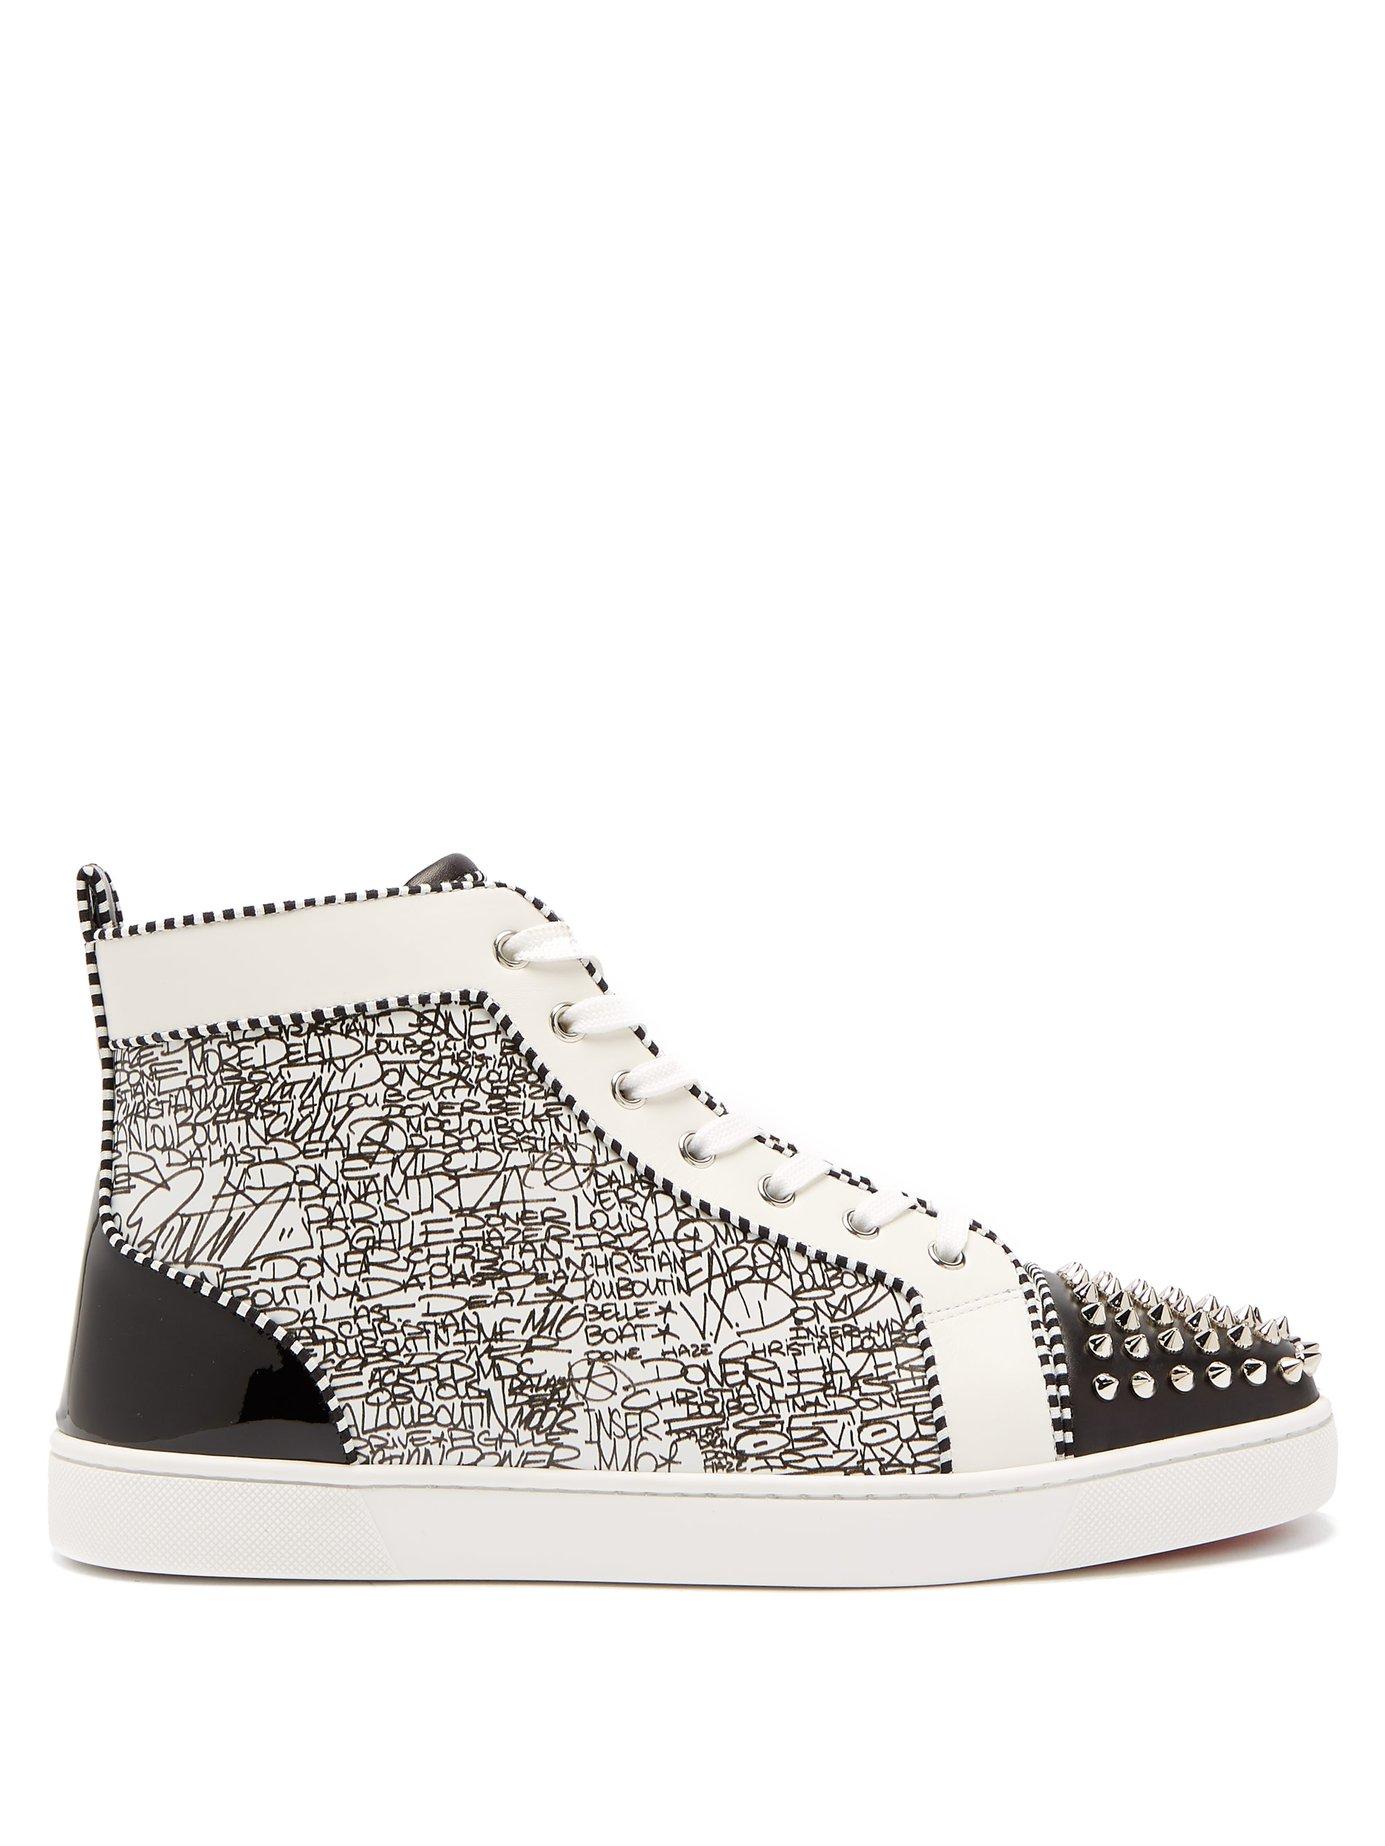 Christian Louboutin Graffiti High Top Trainers for Men | Lyst